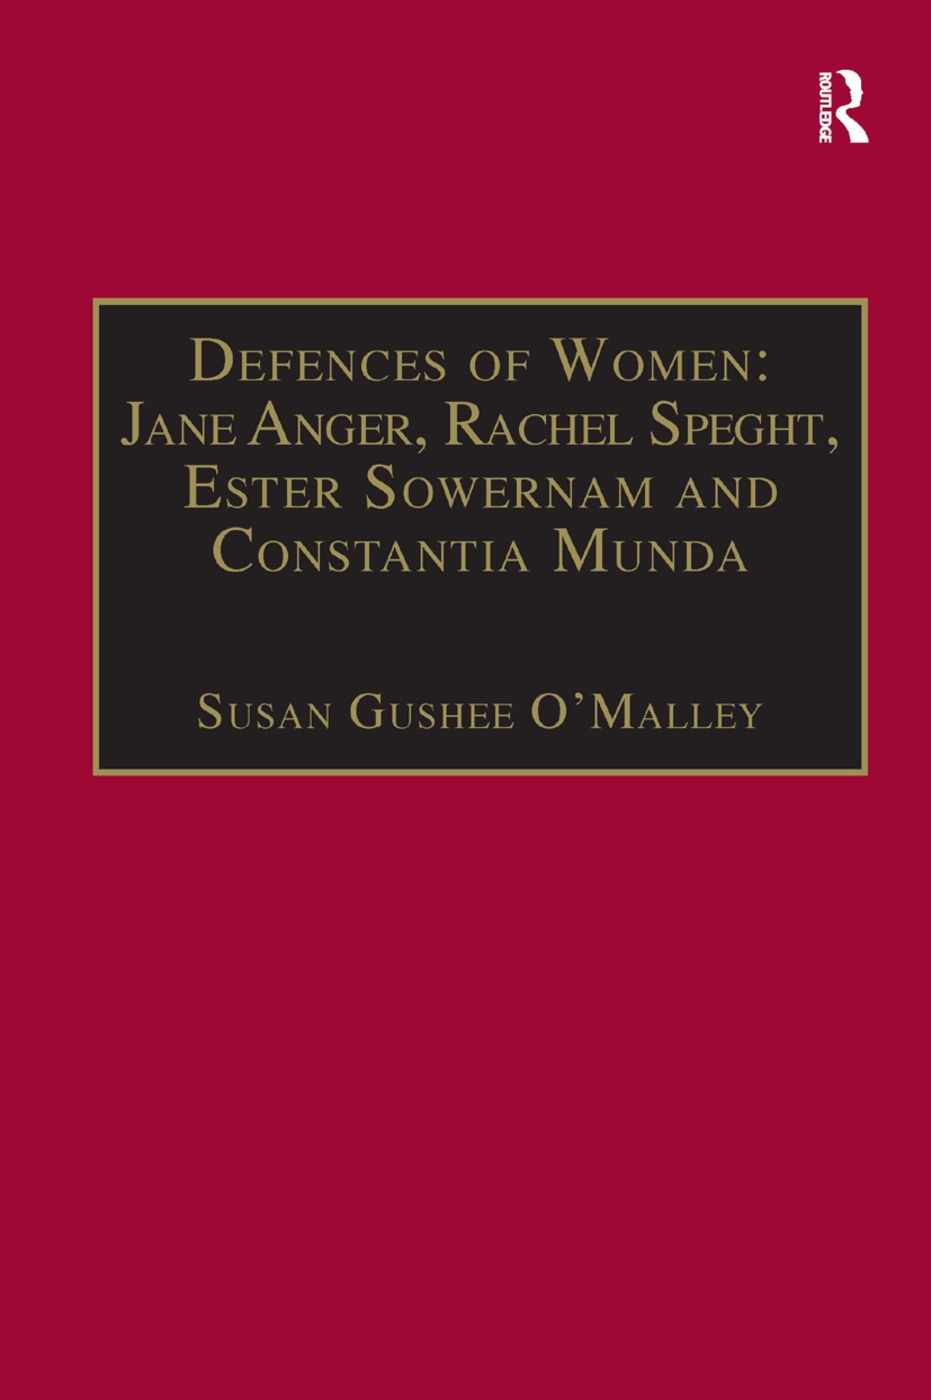 The Early Modern Englishwoman: A Facsimile Library of Essential Works : Printed Writings, 1500-1640 : Jane Anger, Rachel Speght,